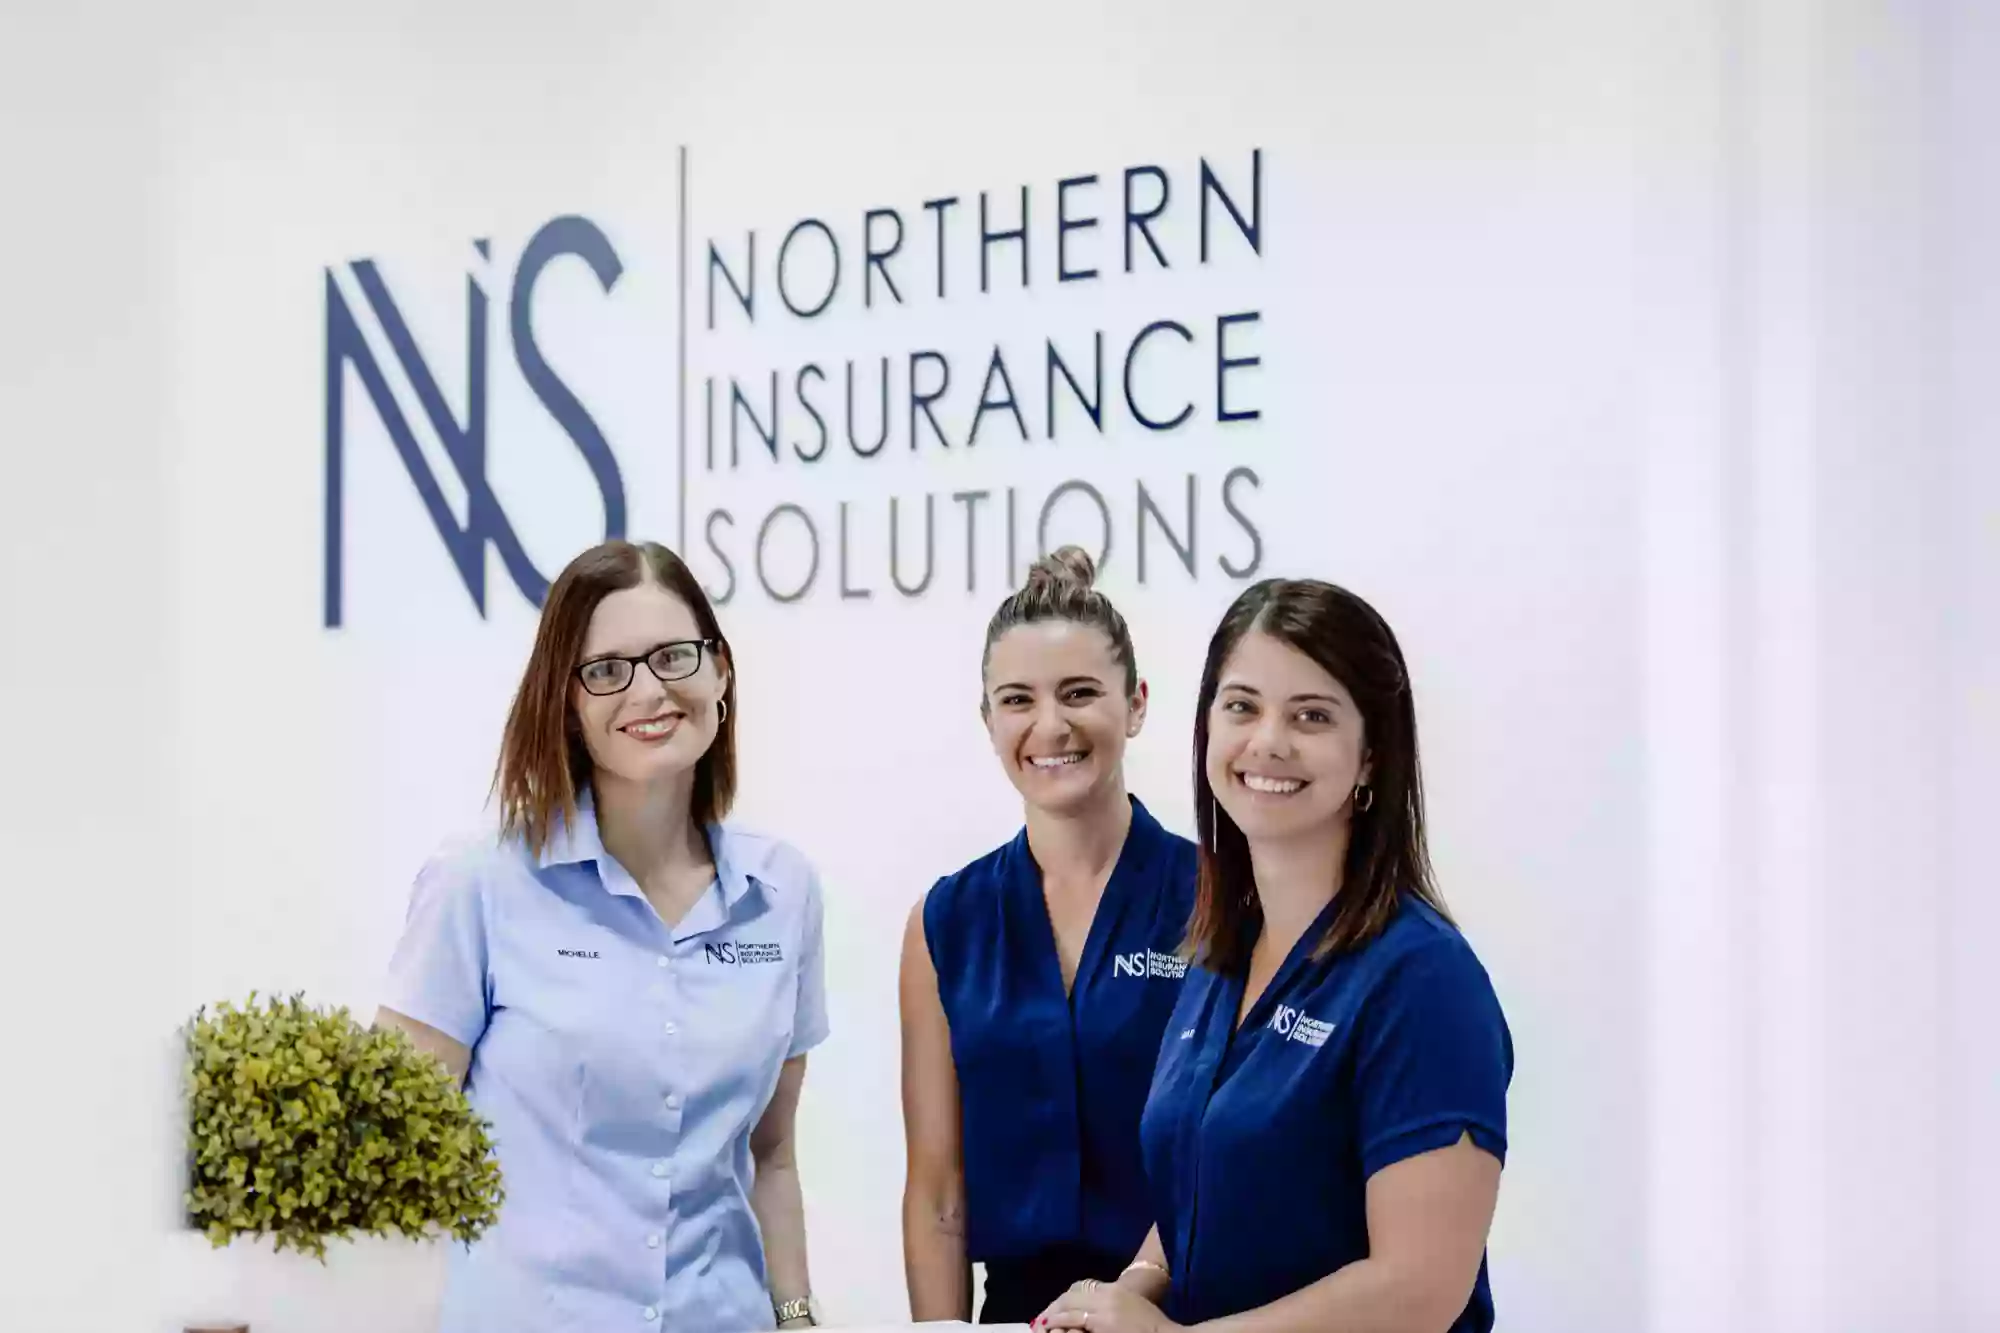 Northern Insurance Solutions